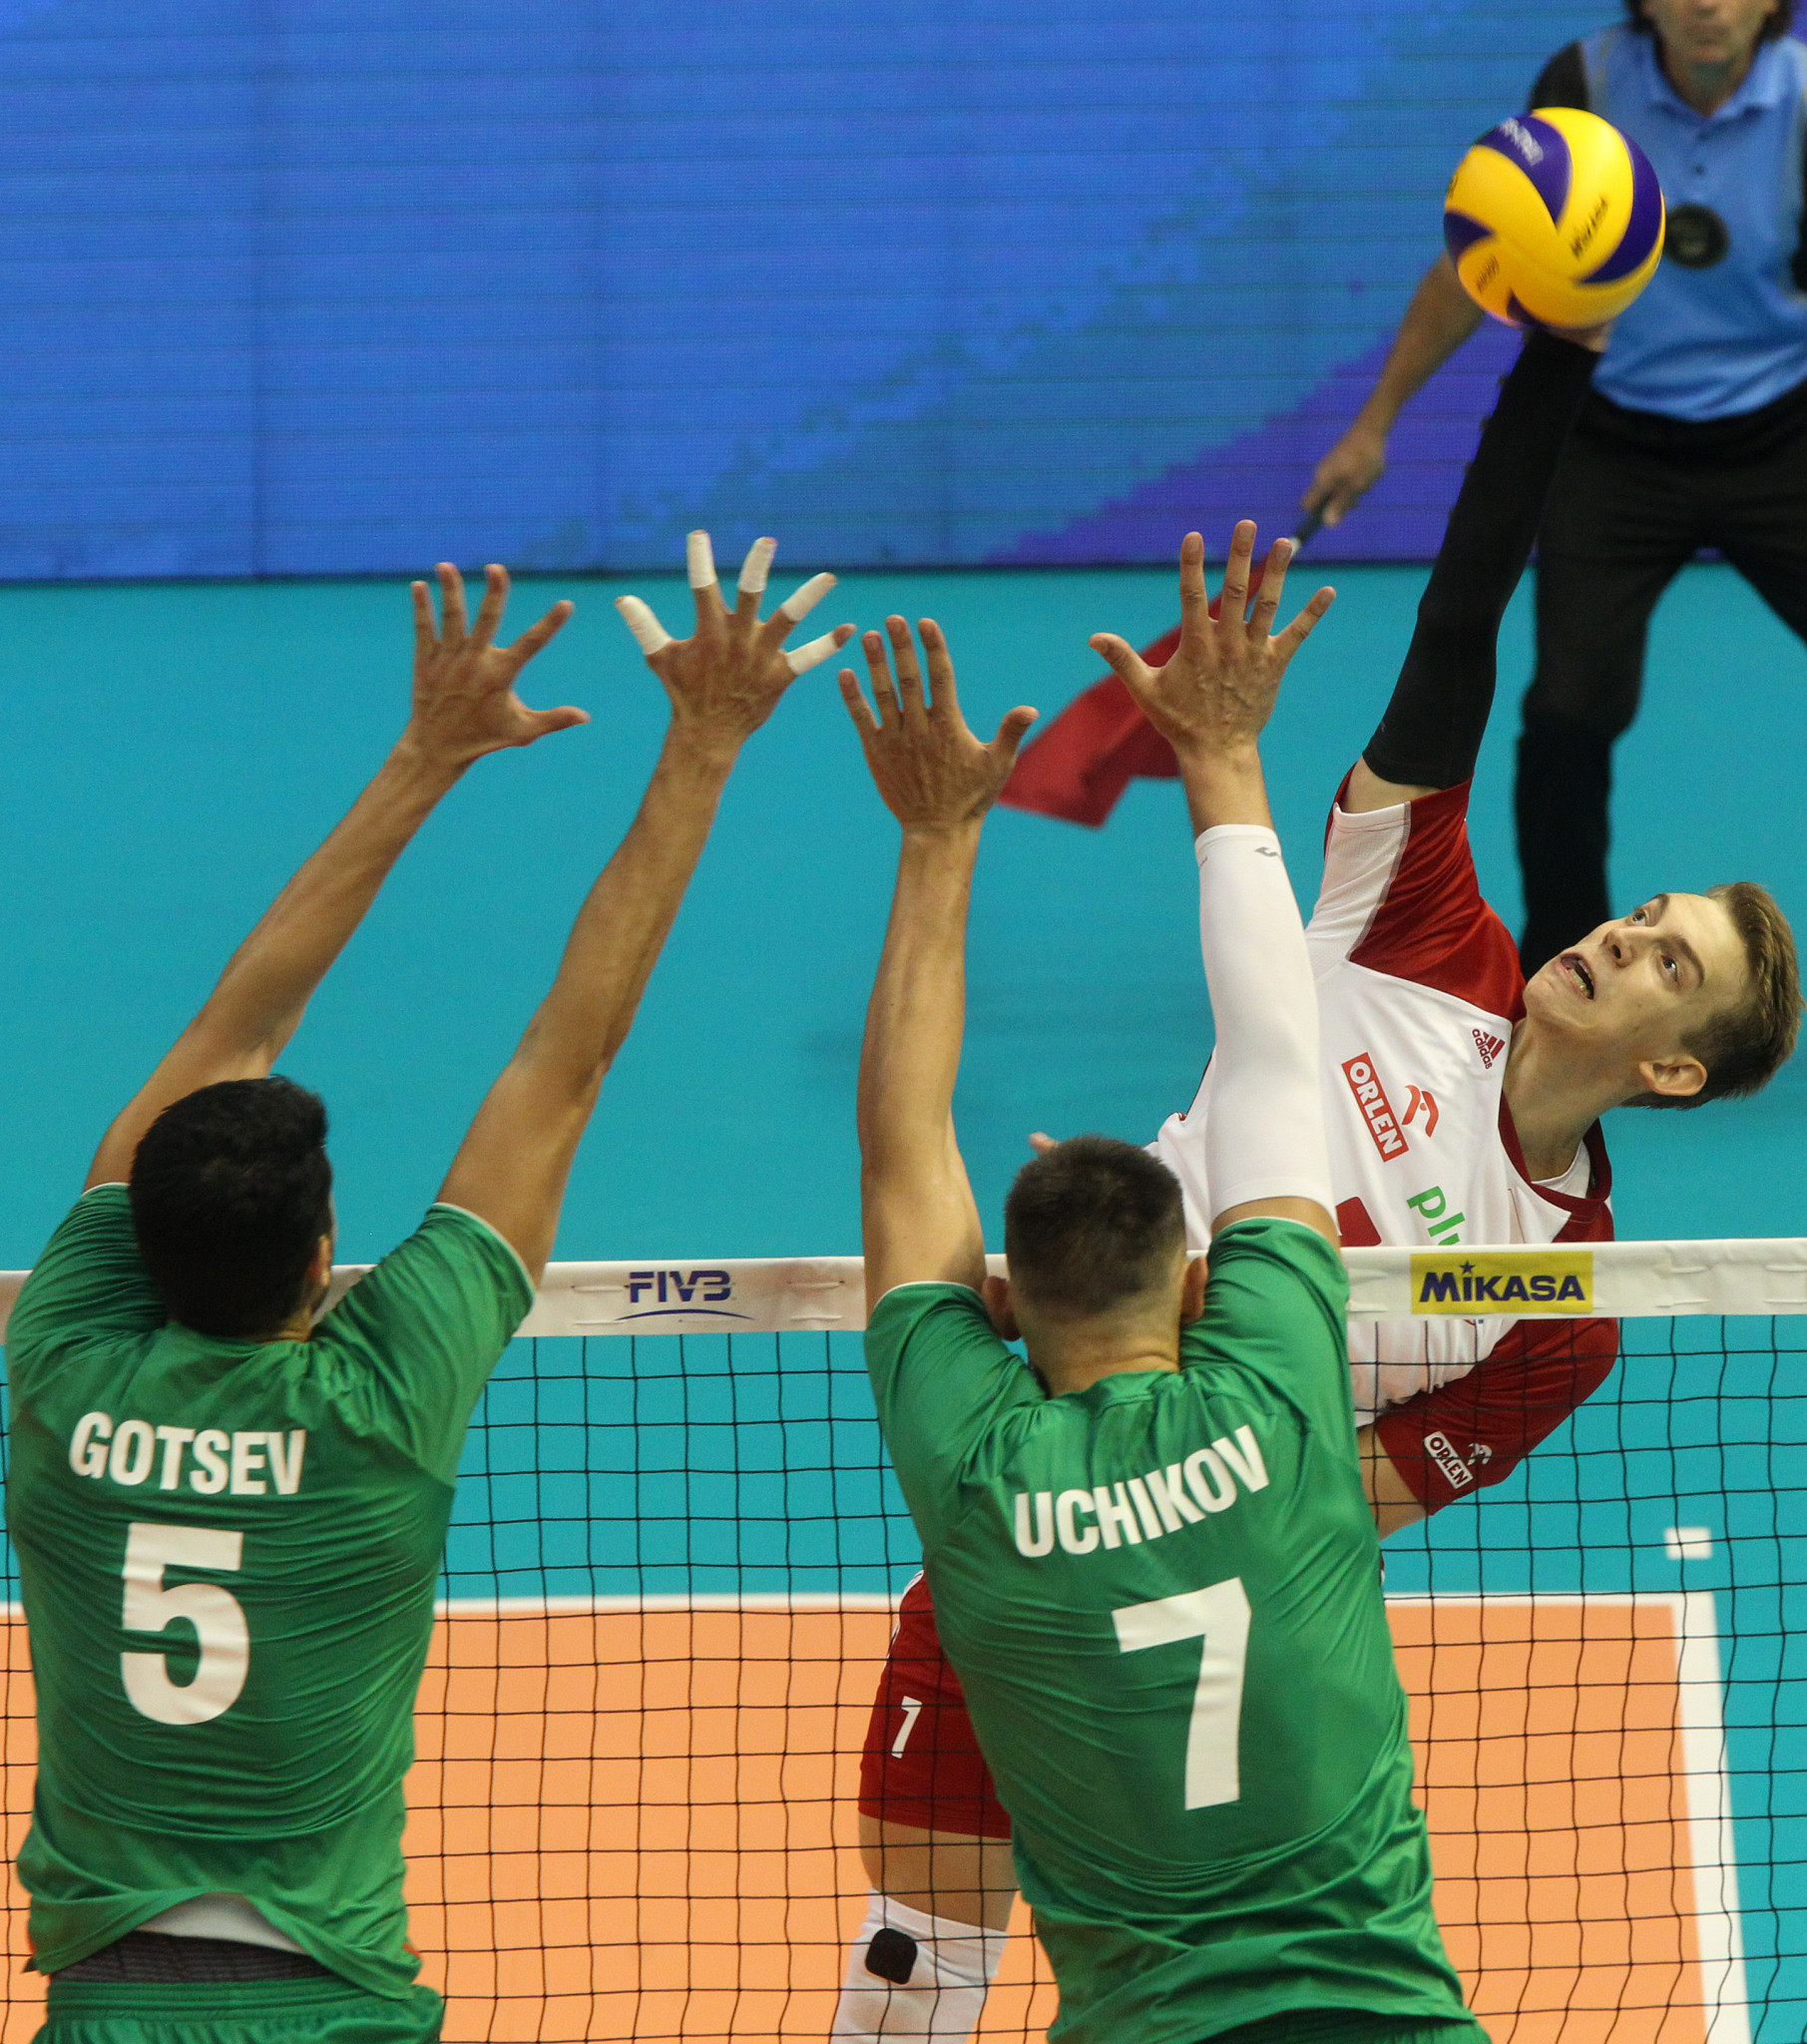 World champions Poland defeated hosts Bulgaria and remain unbeaten ©FIVB